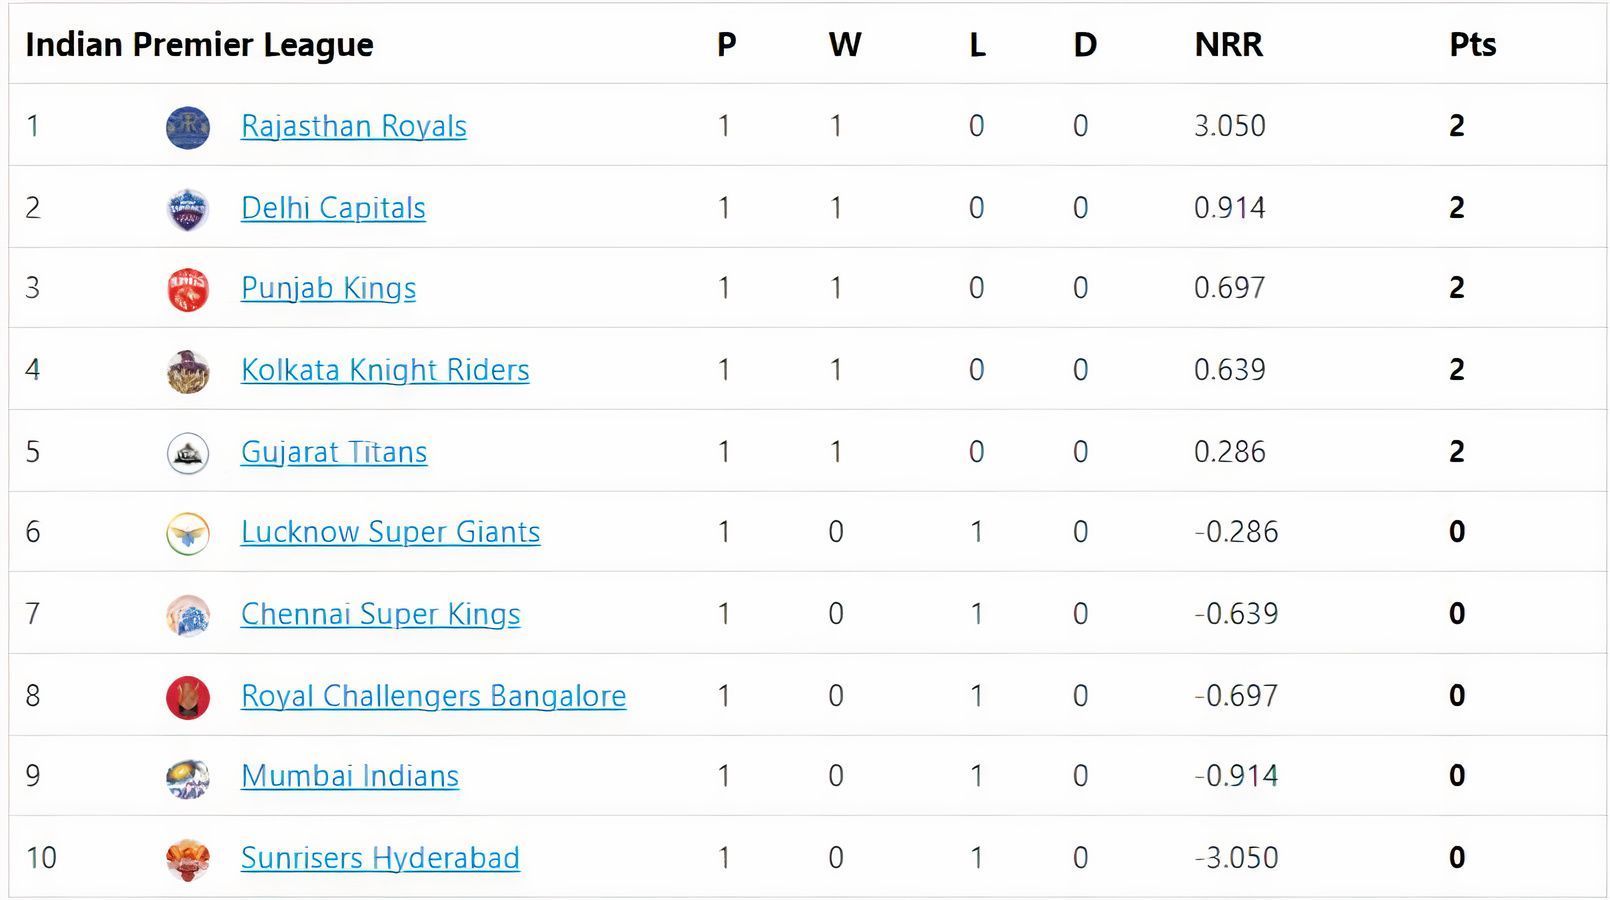 Rajasthan Royals move to the top of the IPL 2022 points table